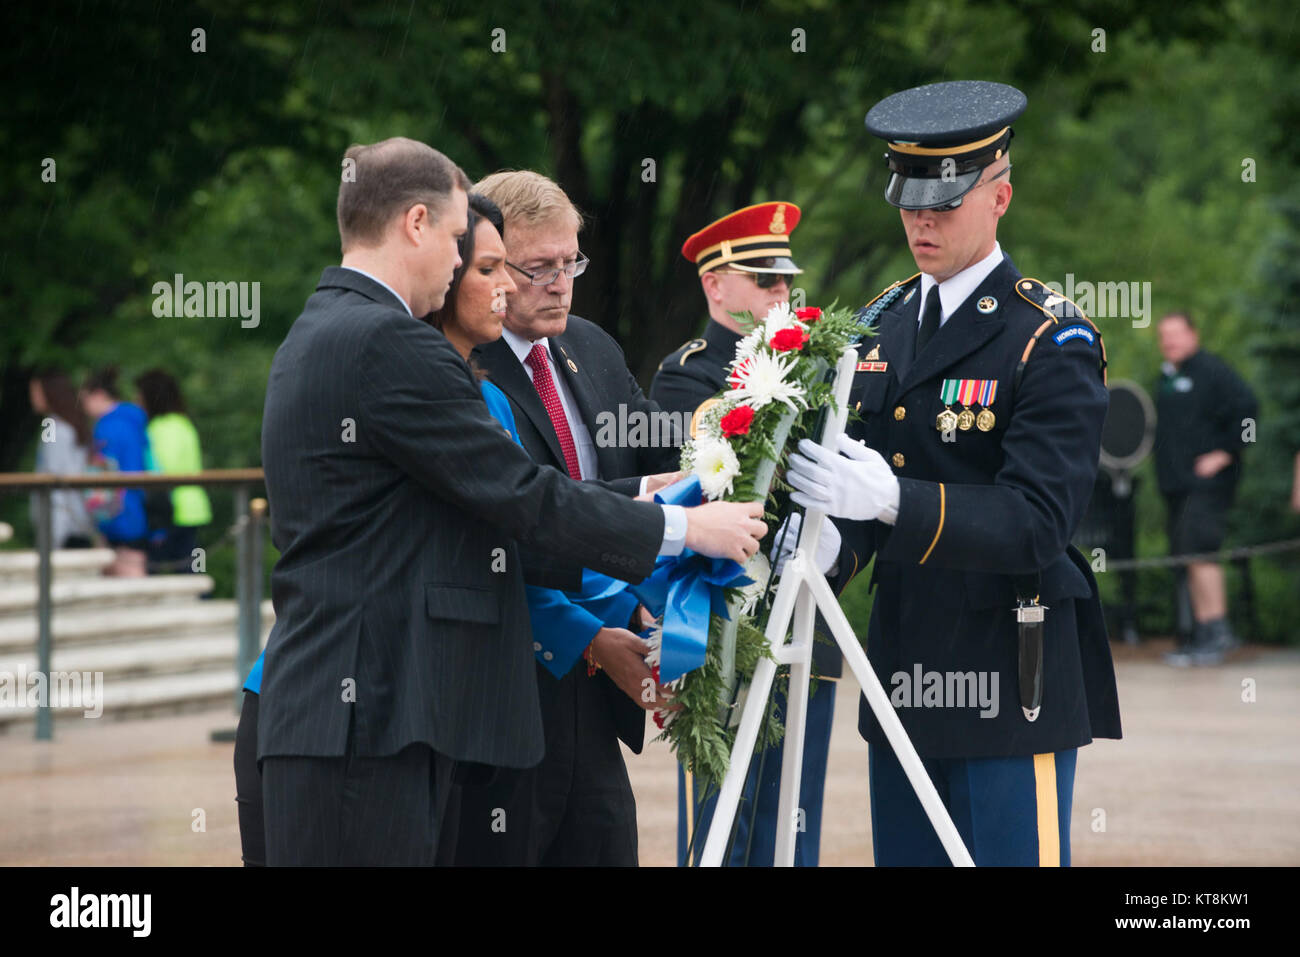 From the left, Reps. Jim Bridenstine of Oklahoma’s First District, Tulsi Gabbard of Hawaii Second District and Paul Cook of California’s Eighth District, lay a wreath at the Tomb of the Unknown Soldier in Arlington National Cemetery, May 21, 2015, in Arlington, Va., on behalf of the sophomore class of the 114th Congress. Dignitaries from all over the world pay respects to those buried at Arlington National Cemetery in more than 3,000 ceremonies each year. (U.S. Army photo by Rachel Larue/Released) Stock Photo